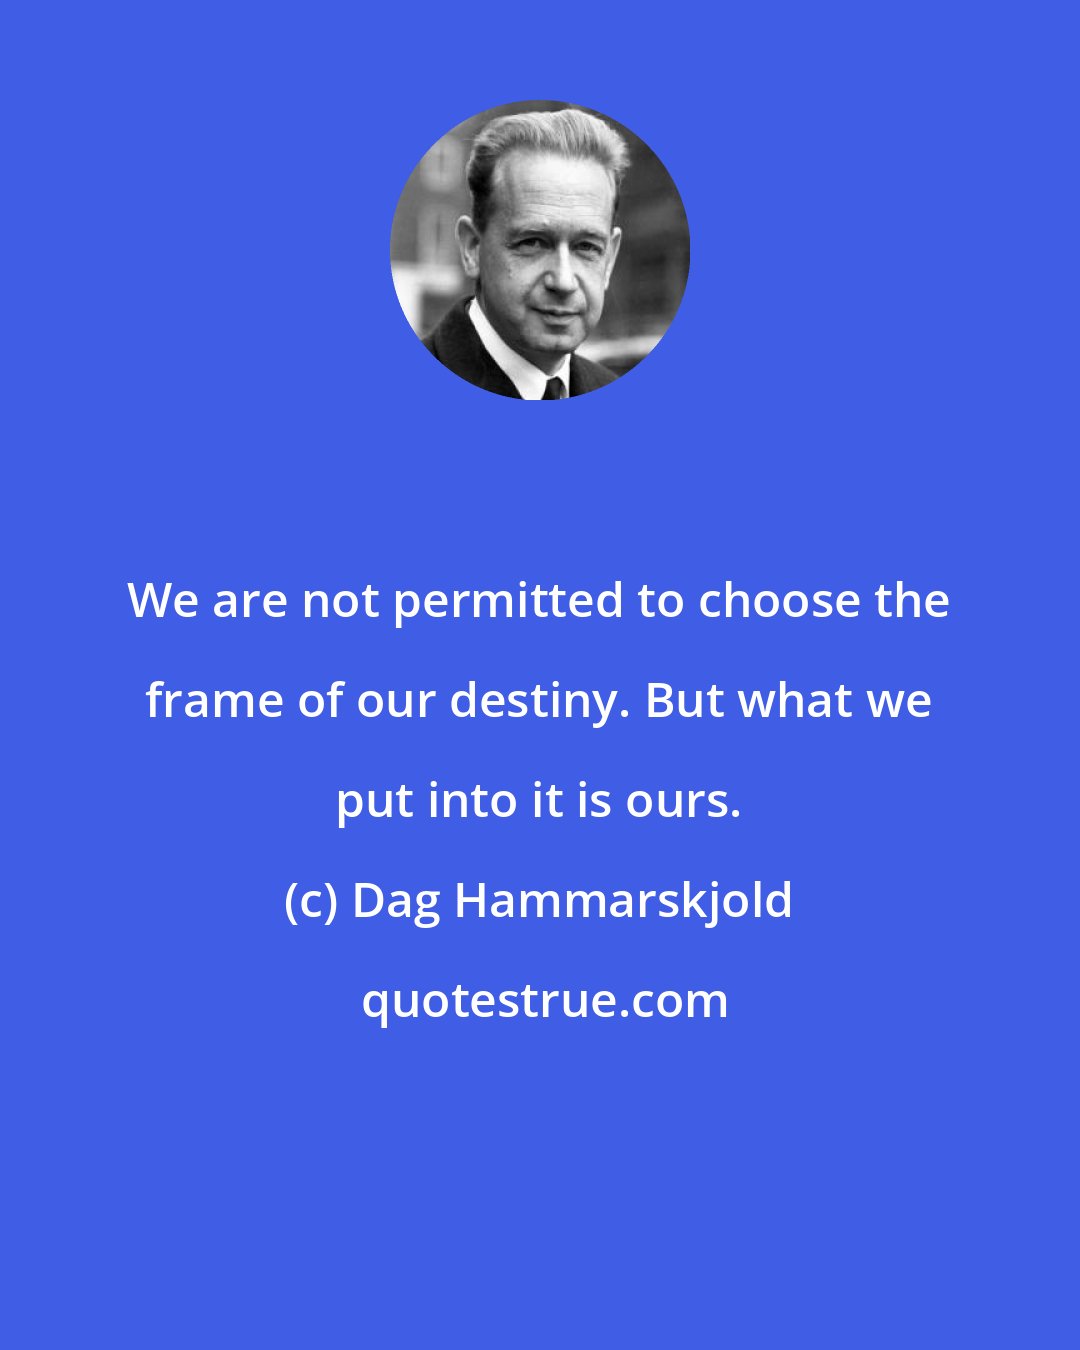 Dag Hammarskjold: We are not permitted to choose the frame of our destiny. But what we put into it is ours.